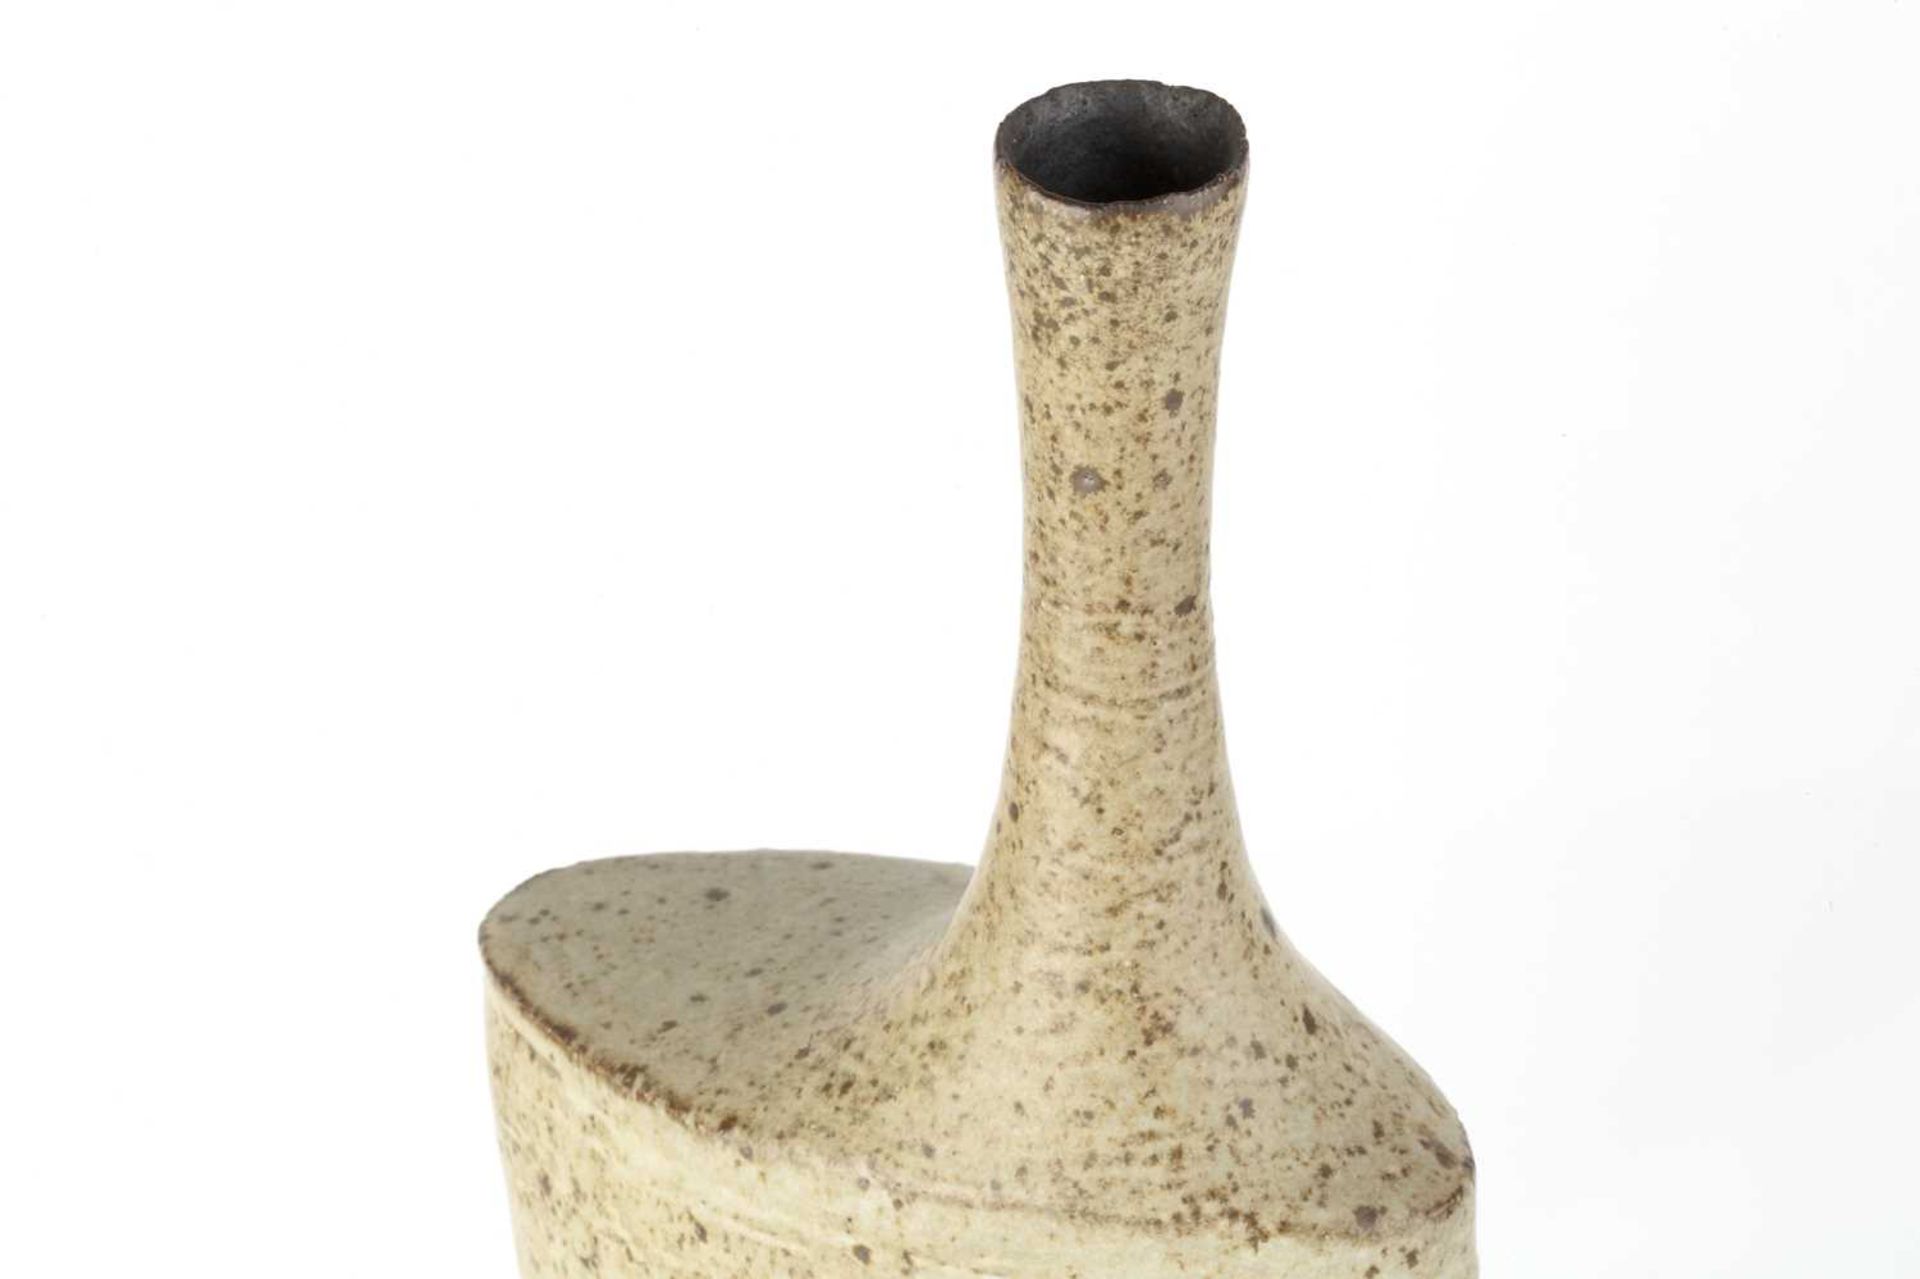 Joanna Constantinidis (1927-2000) Vessel stoneware a thin neck running from the shoulders, oatmeal - Image 3 of 8